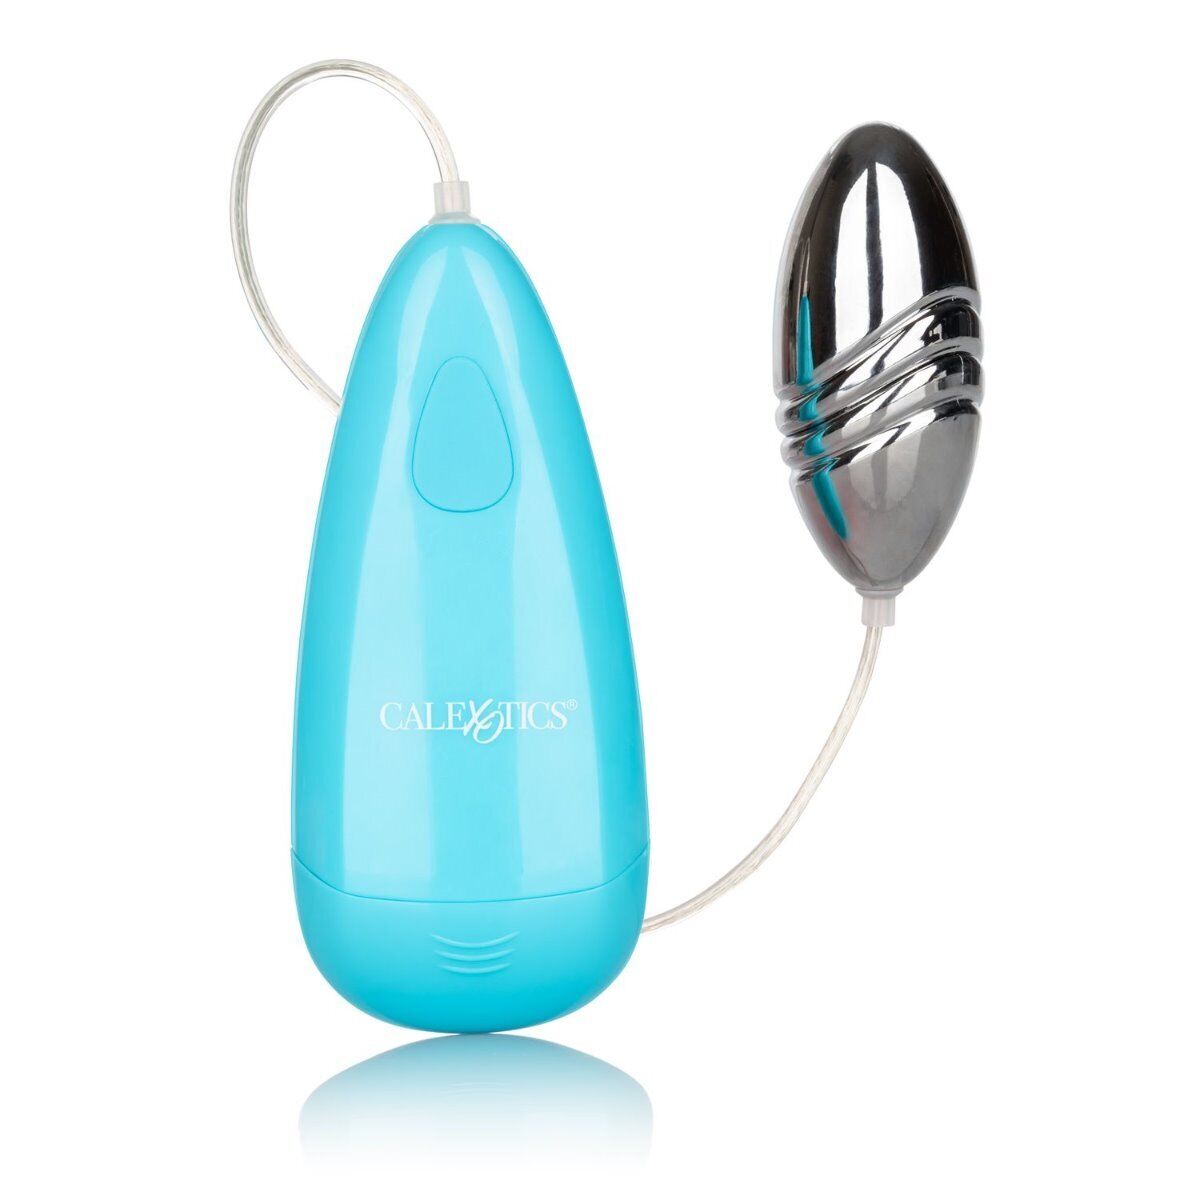 Waterproof Gyrating Silver Bullet Egg Vibrator Foreplay Sex-toy for Women Couple